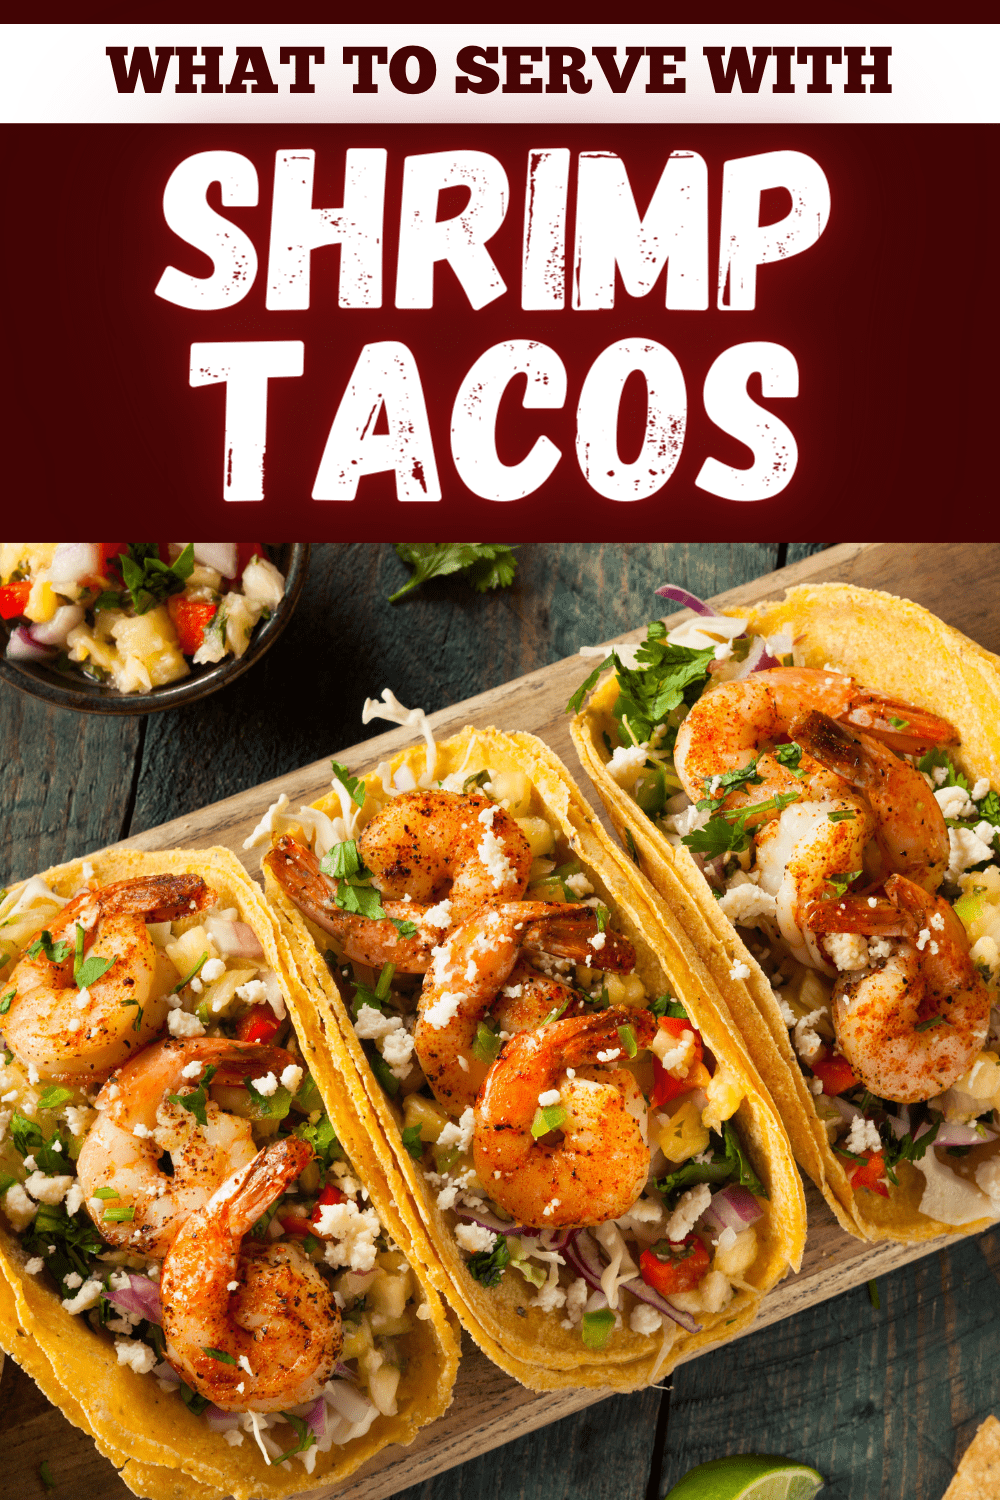 12 Sides for Shrimp Tacos (Quick & Easy) - Insanely Good